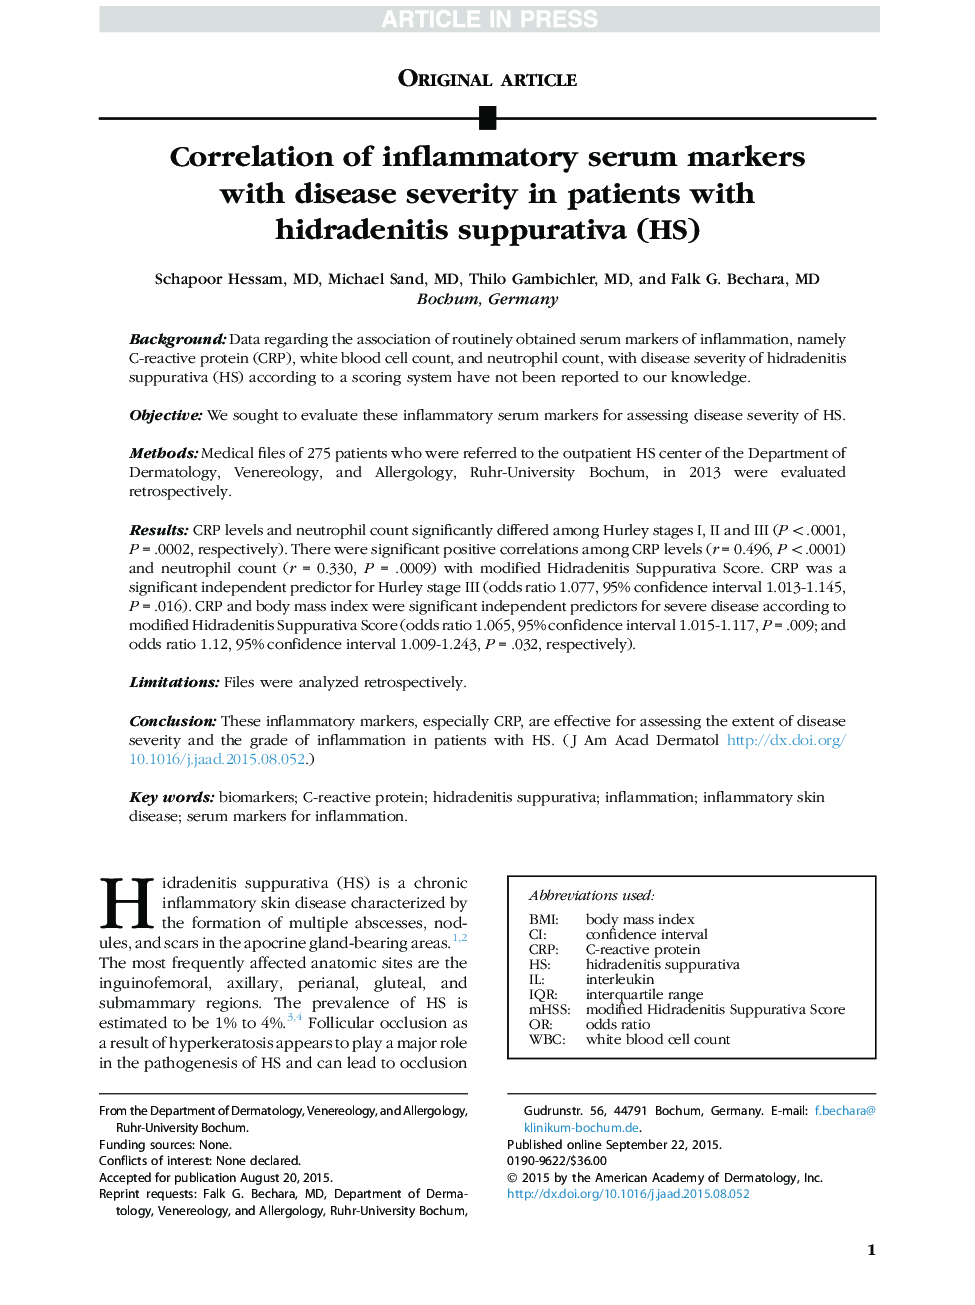 Correlation of inflammatory serum markers with disease severity in patients with hidradenitis suppurativa (HS)